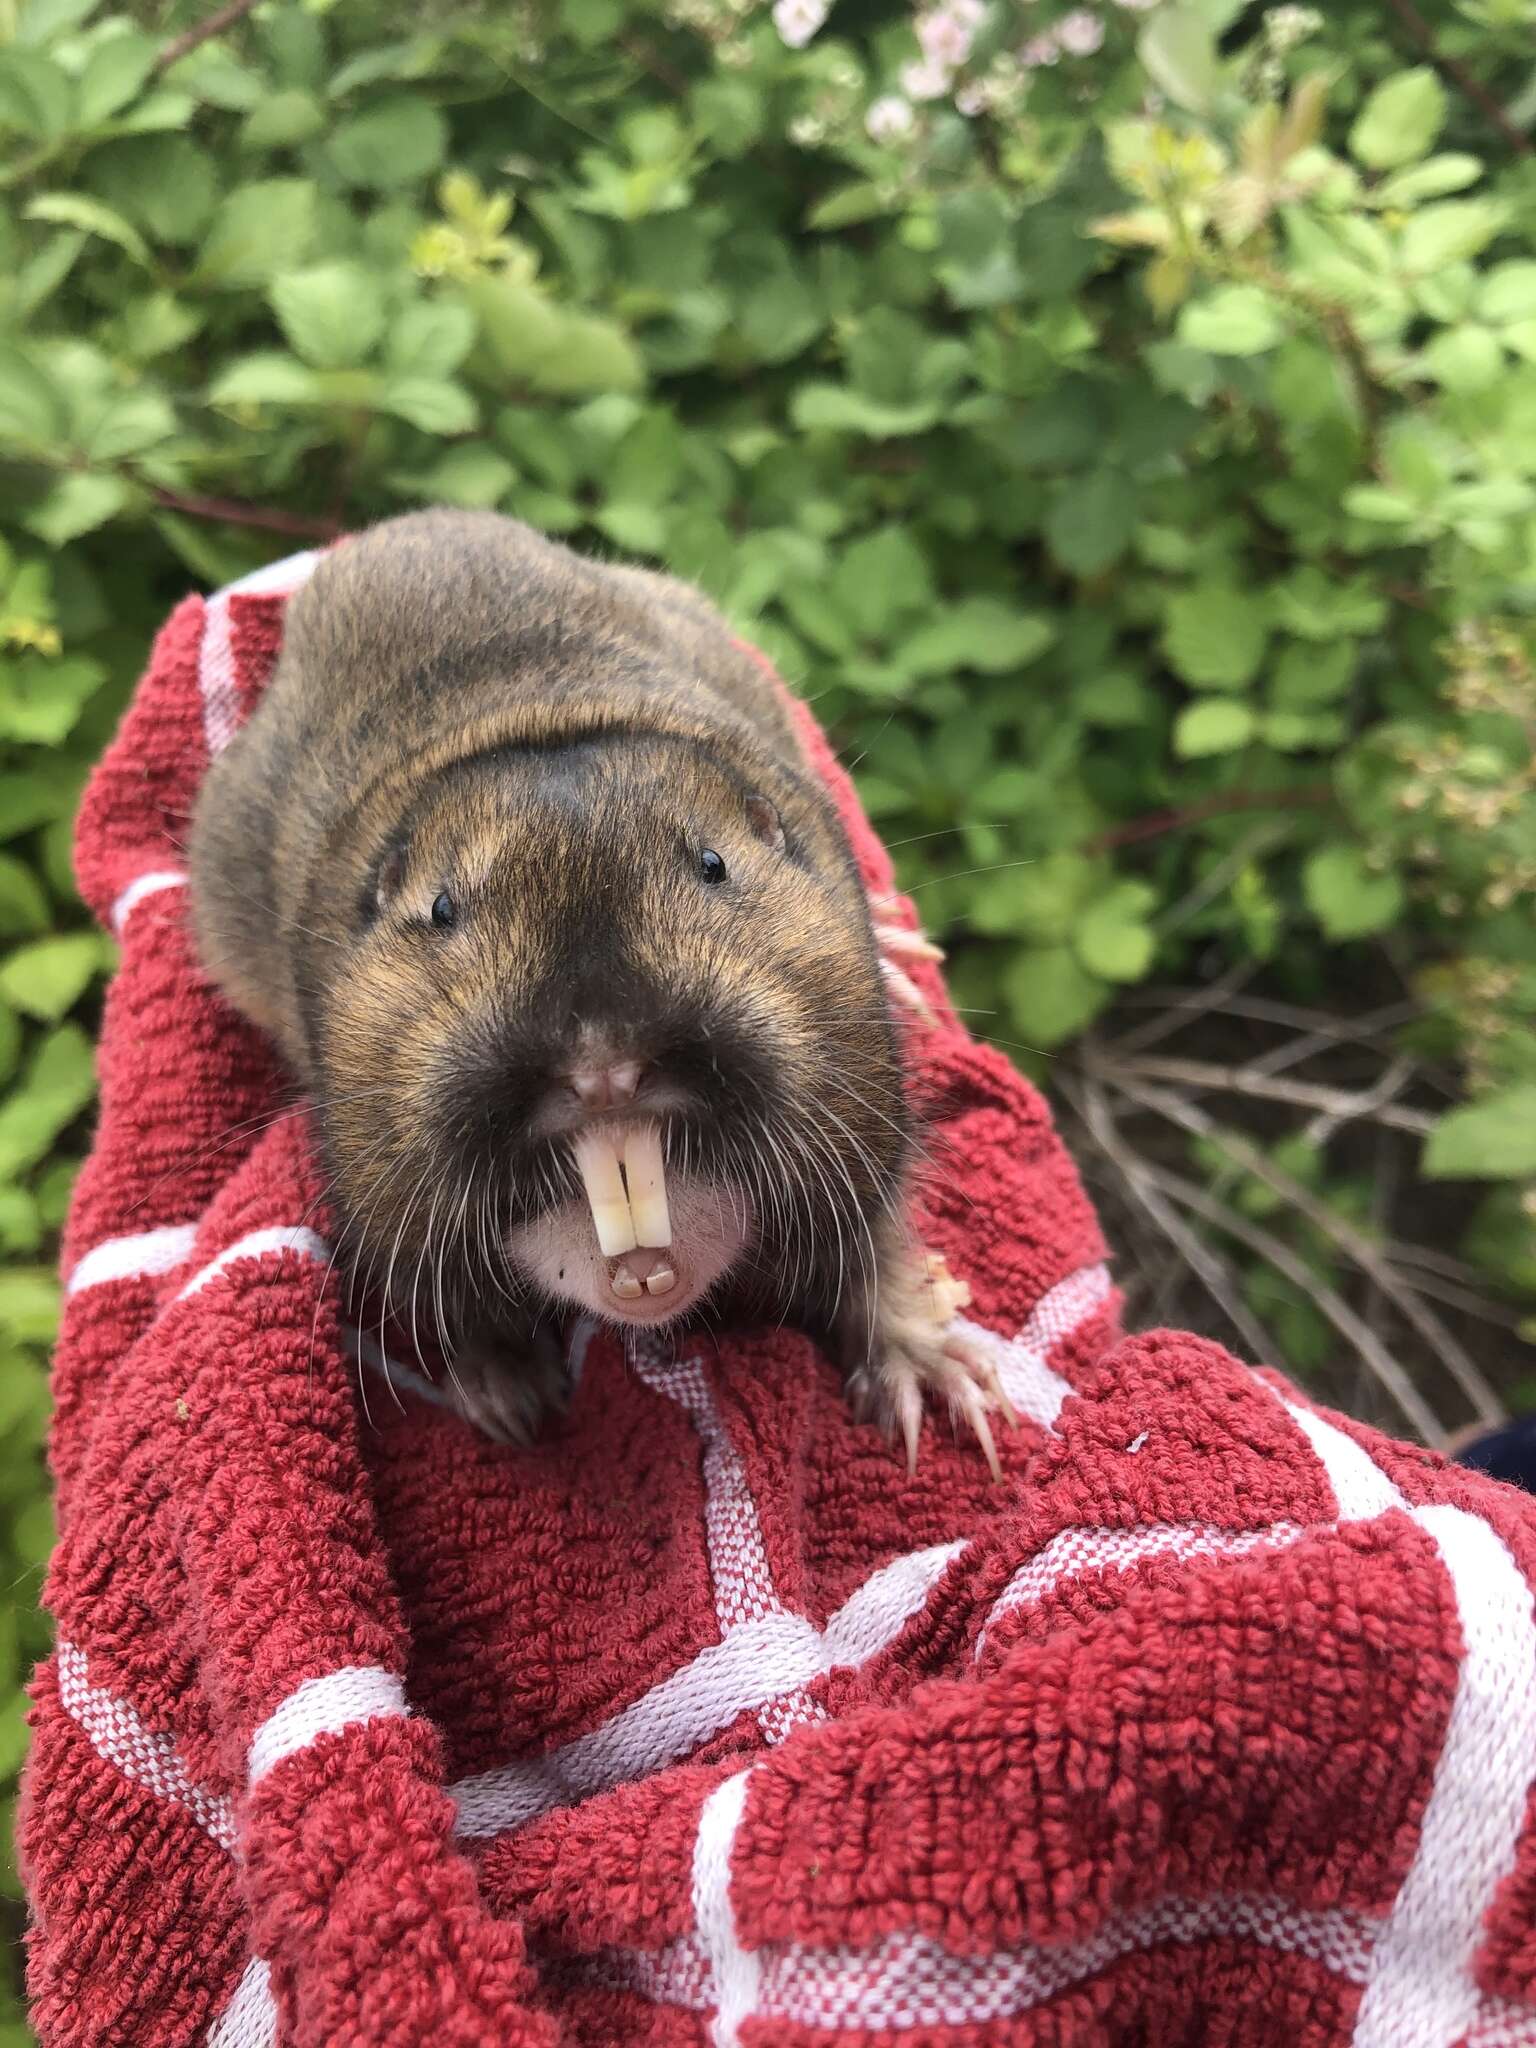 north american gopher